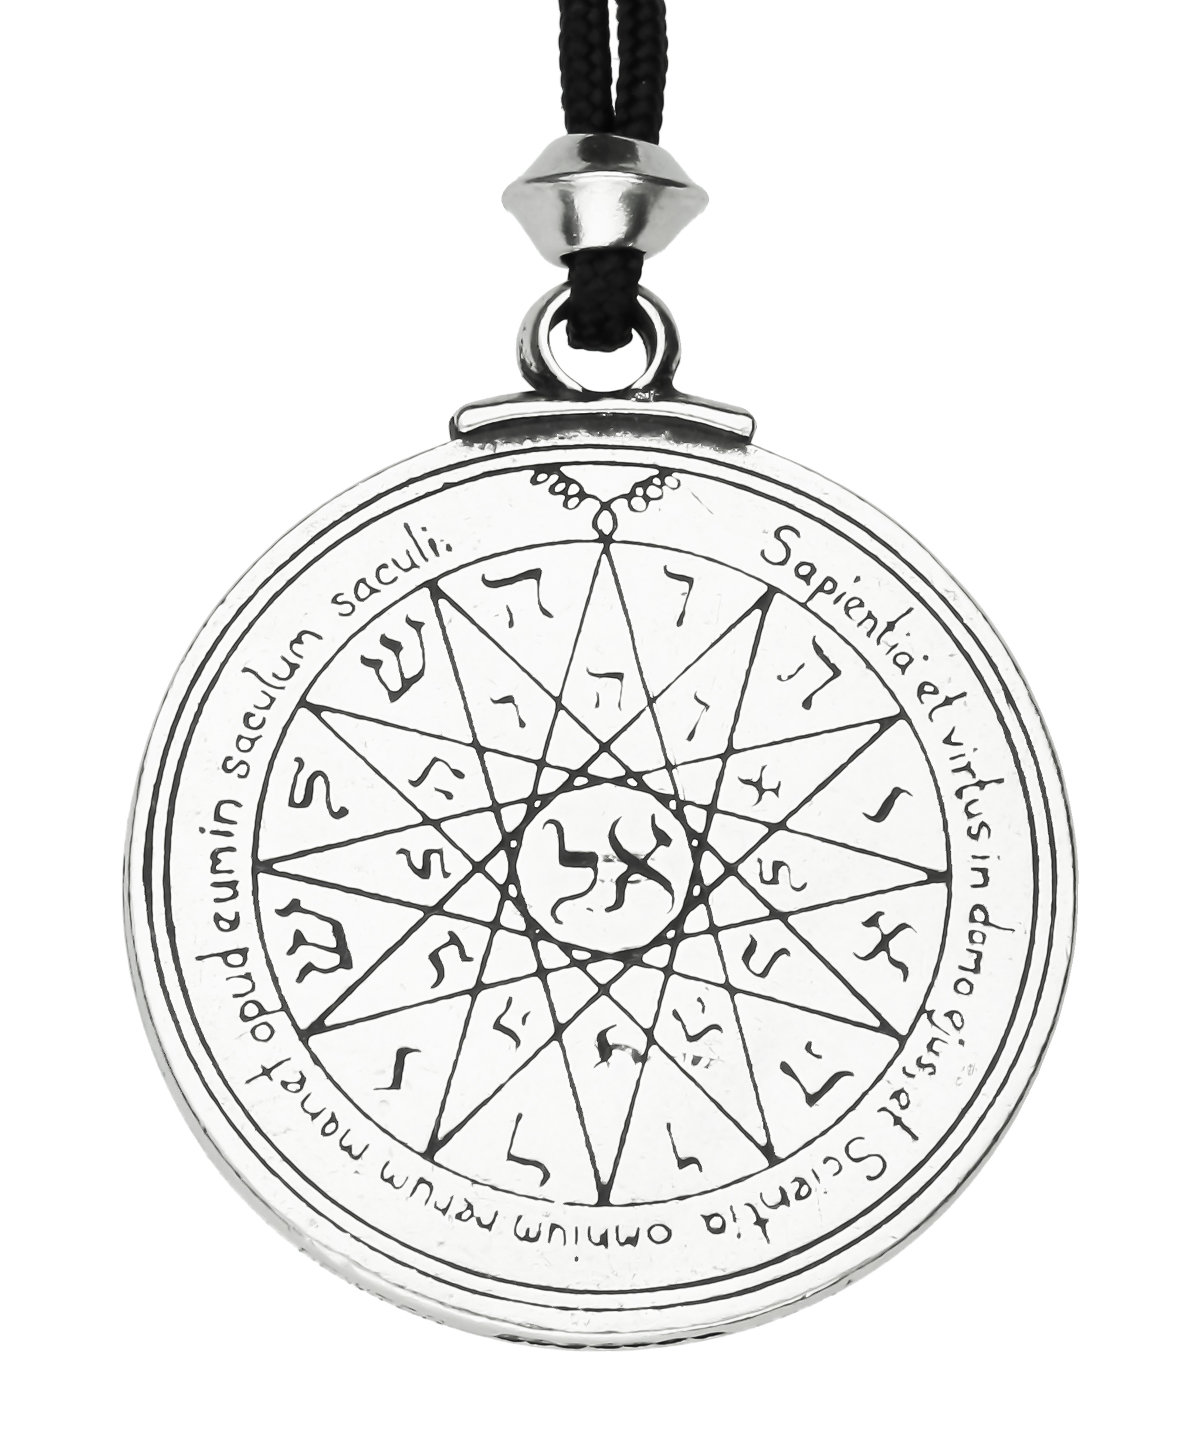 3rd and 4th Pentacle Mercury Talisman Wisdom, Opportunity Handmade Pewter Pendant